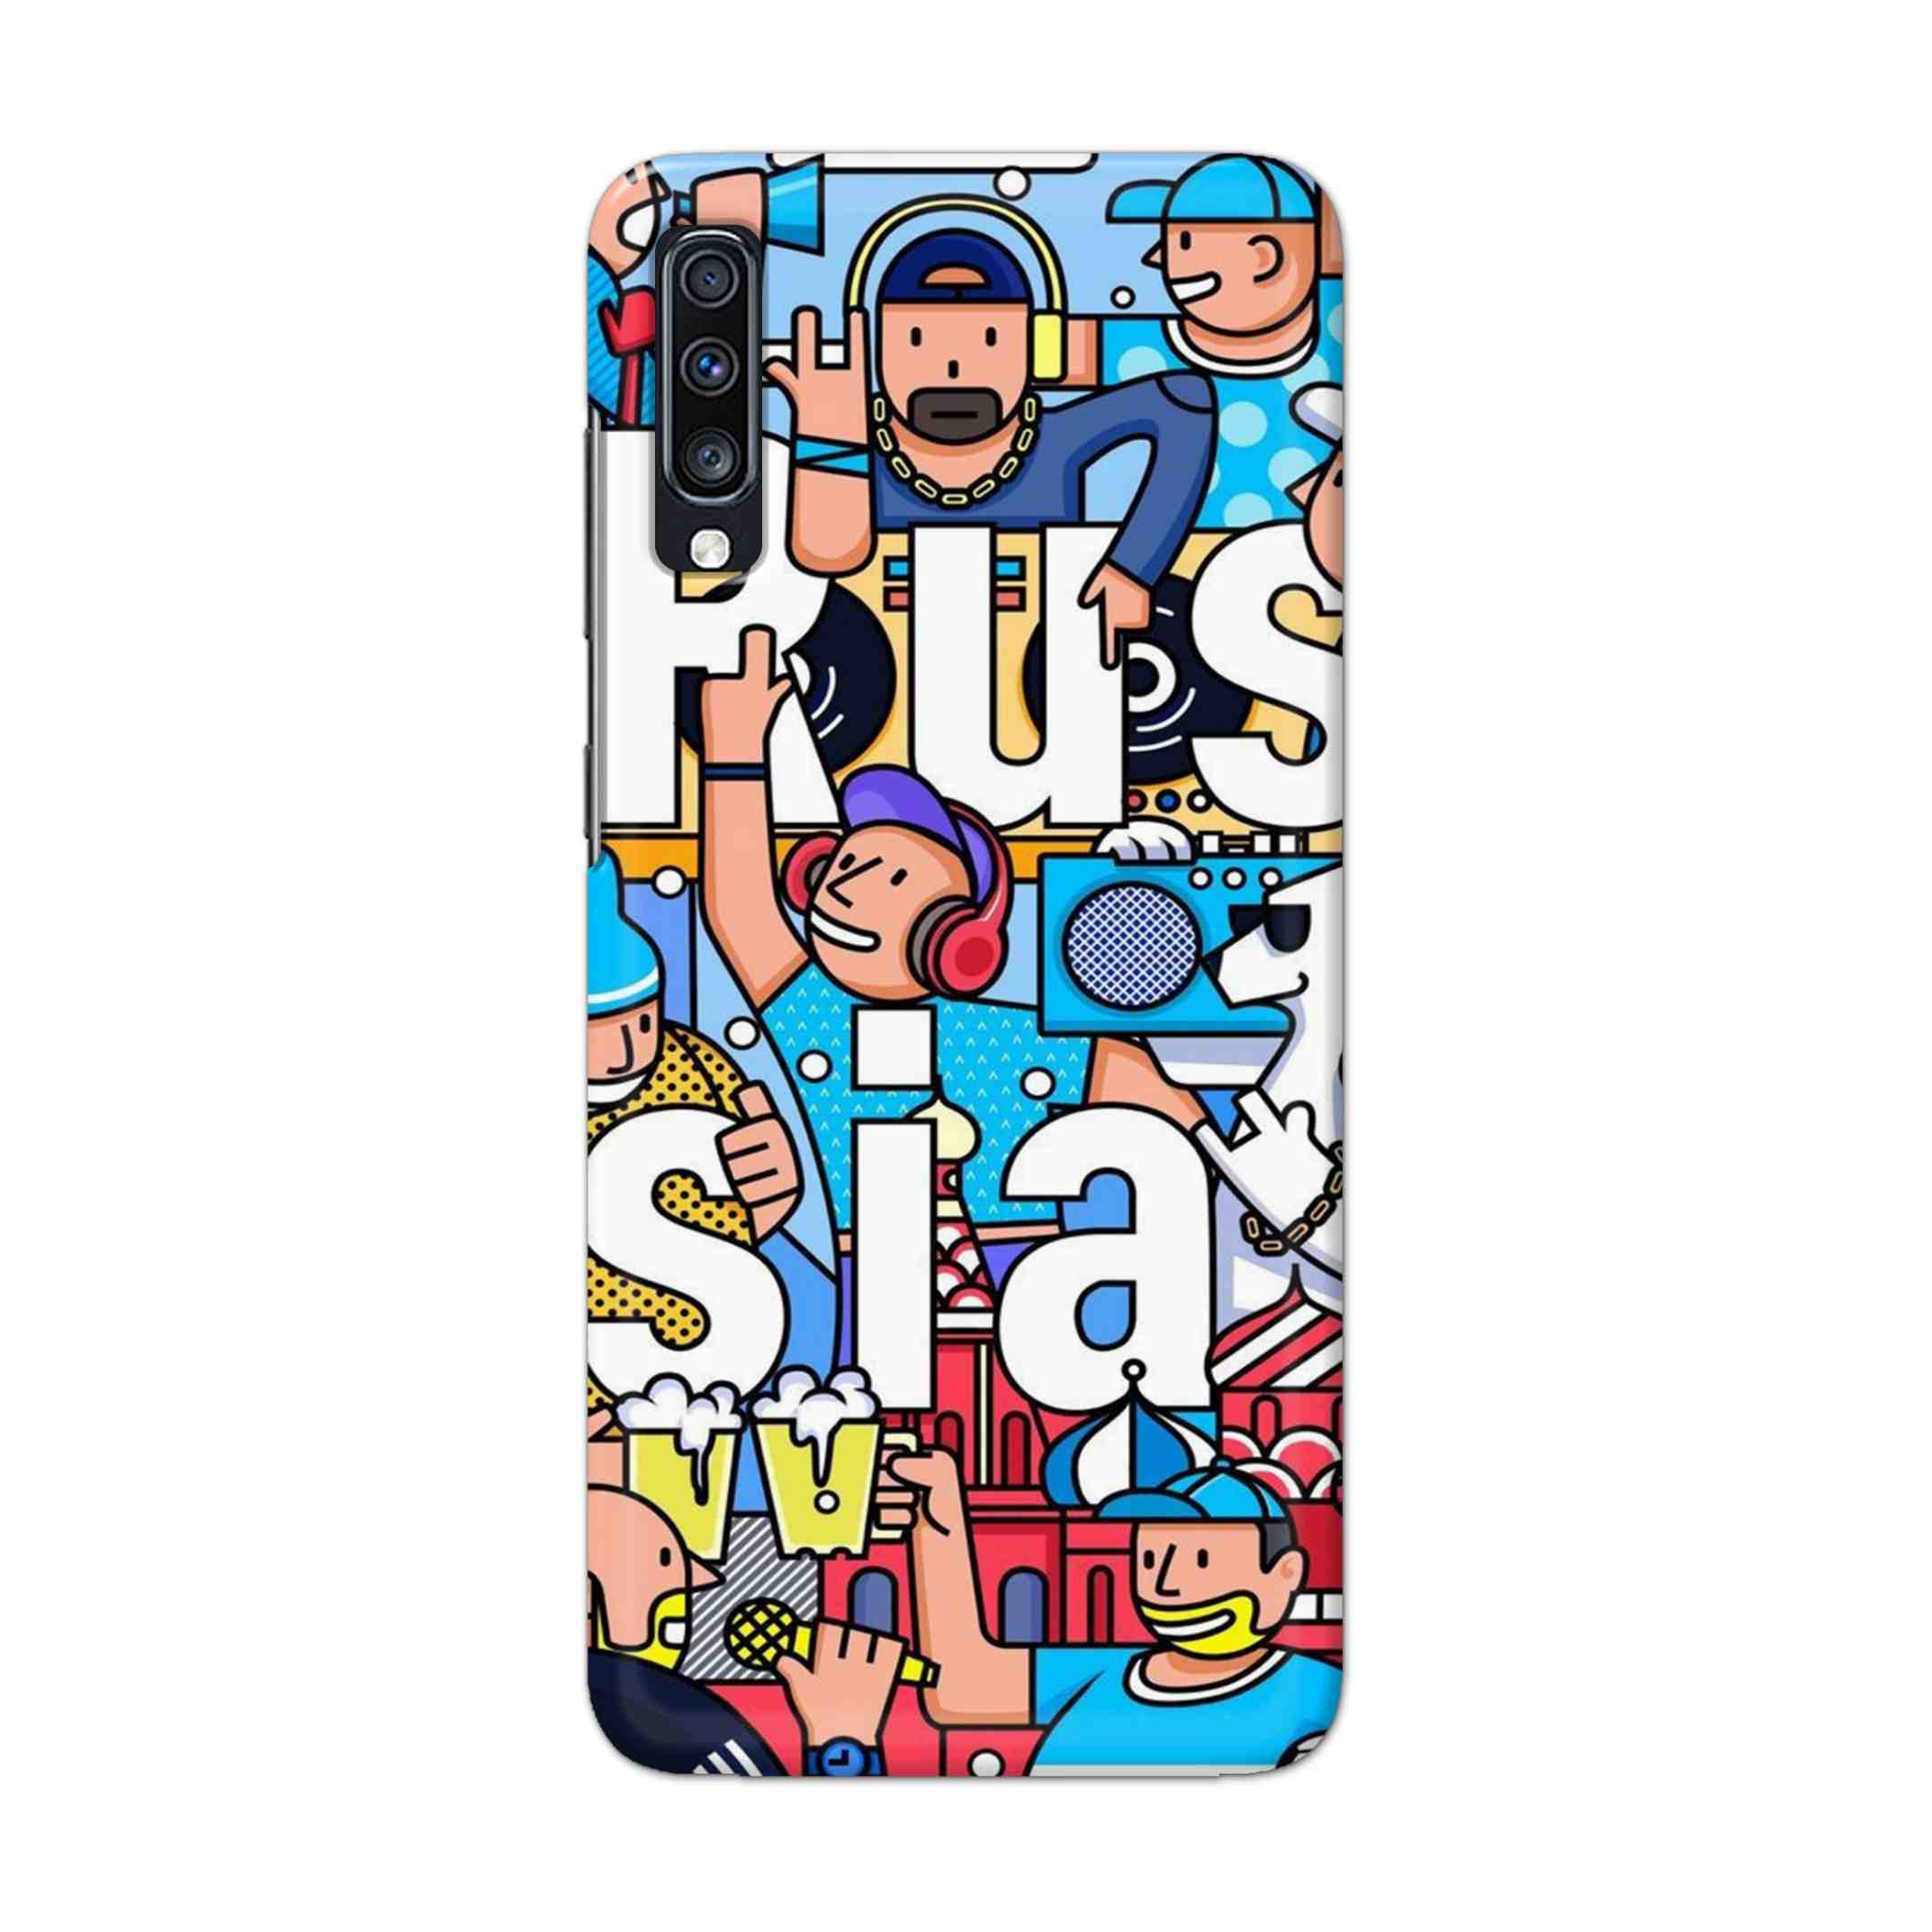 Buy Russia Hard Back Mobile Phone Case Cover For Samsung Galaxy A70 Online